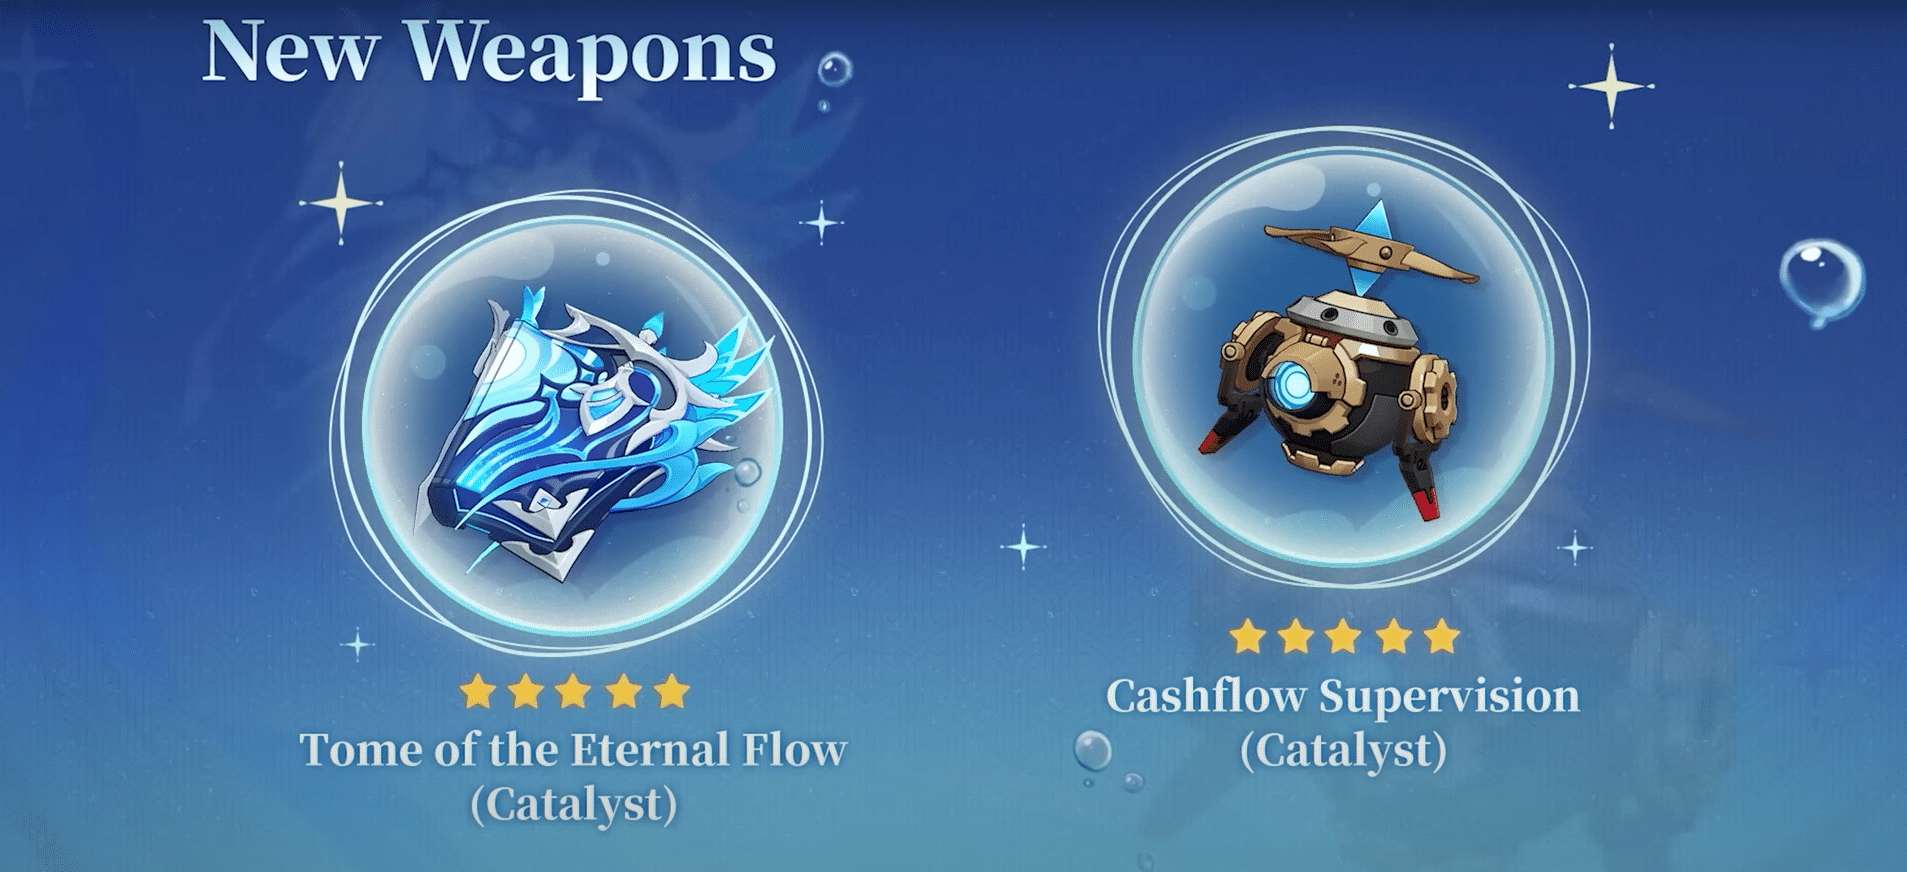 New 5-Star Weapons